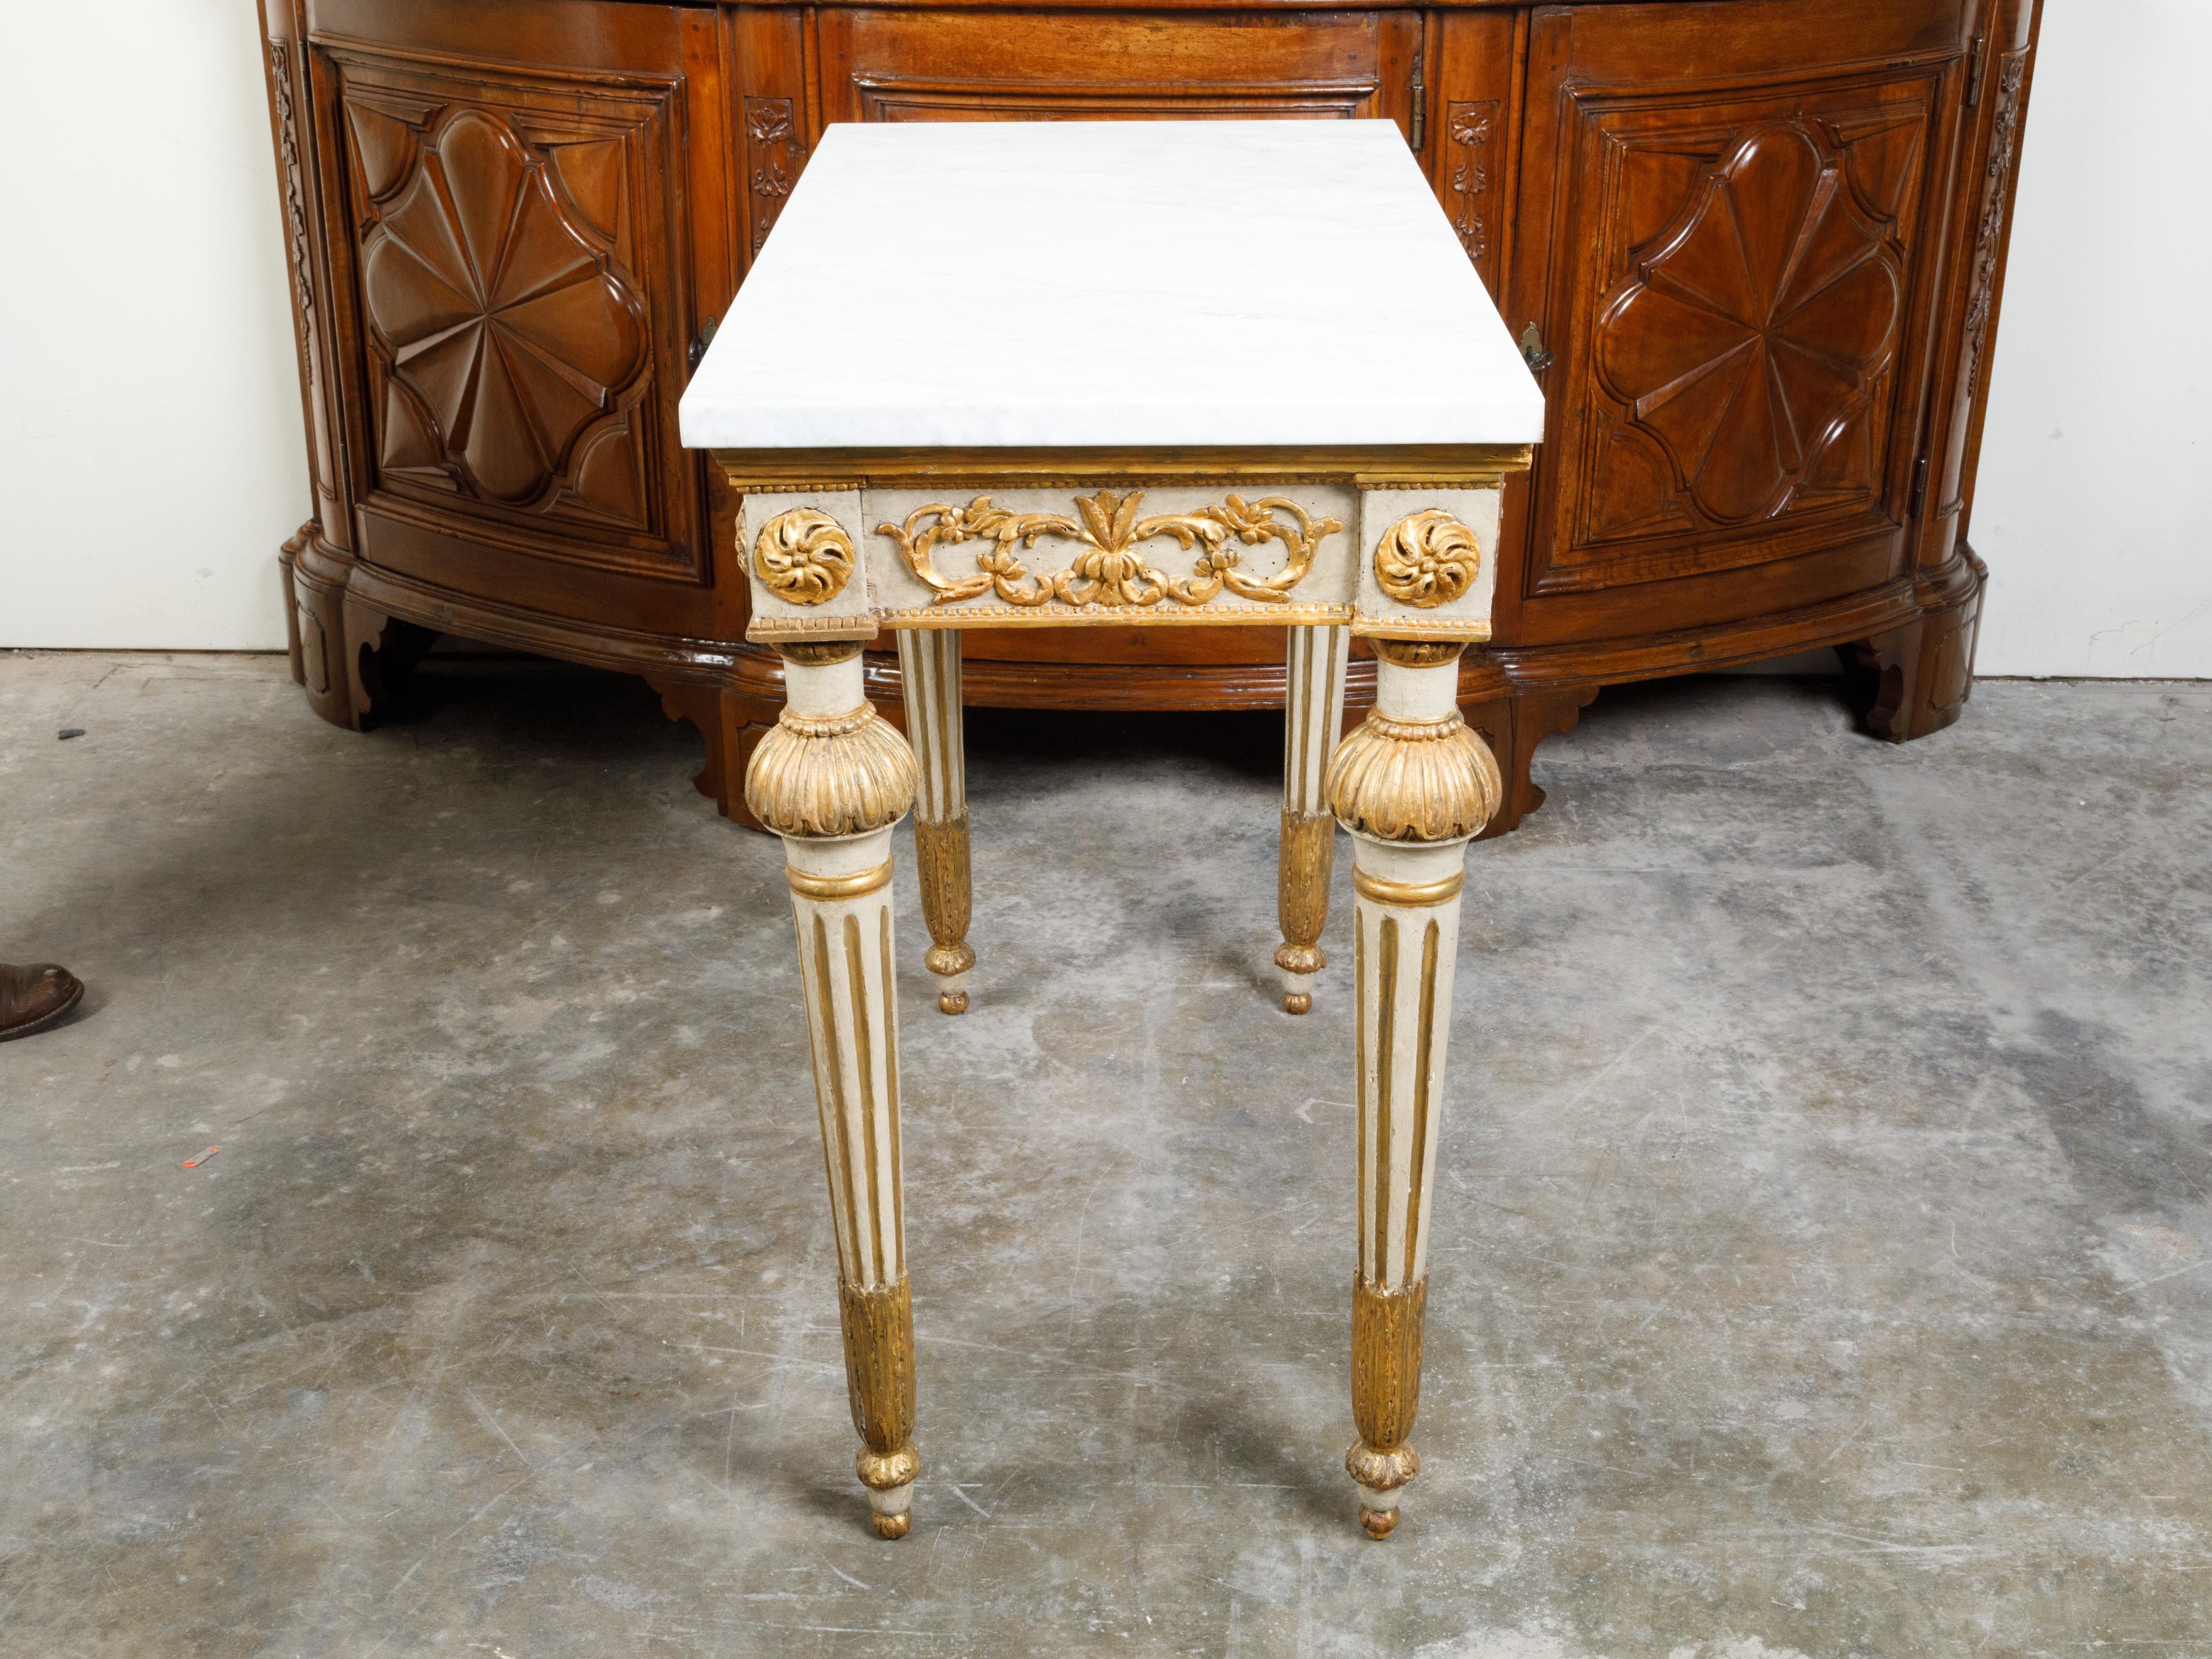 Italian 18th Century Neoclassical Carved and Gilt Console Table with Marble Top For Sale 7